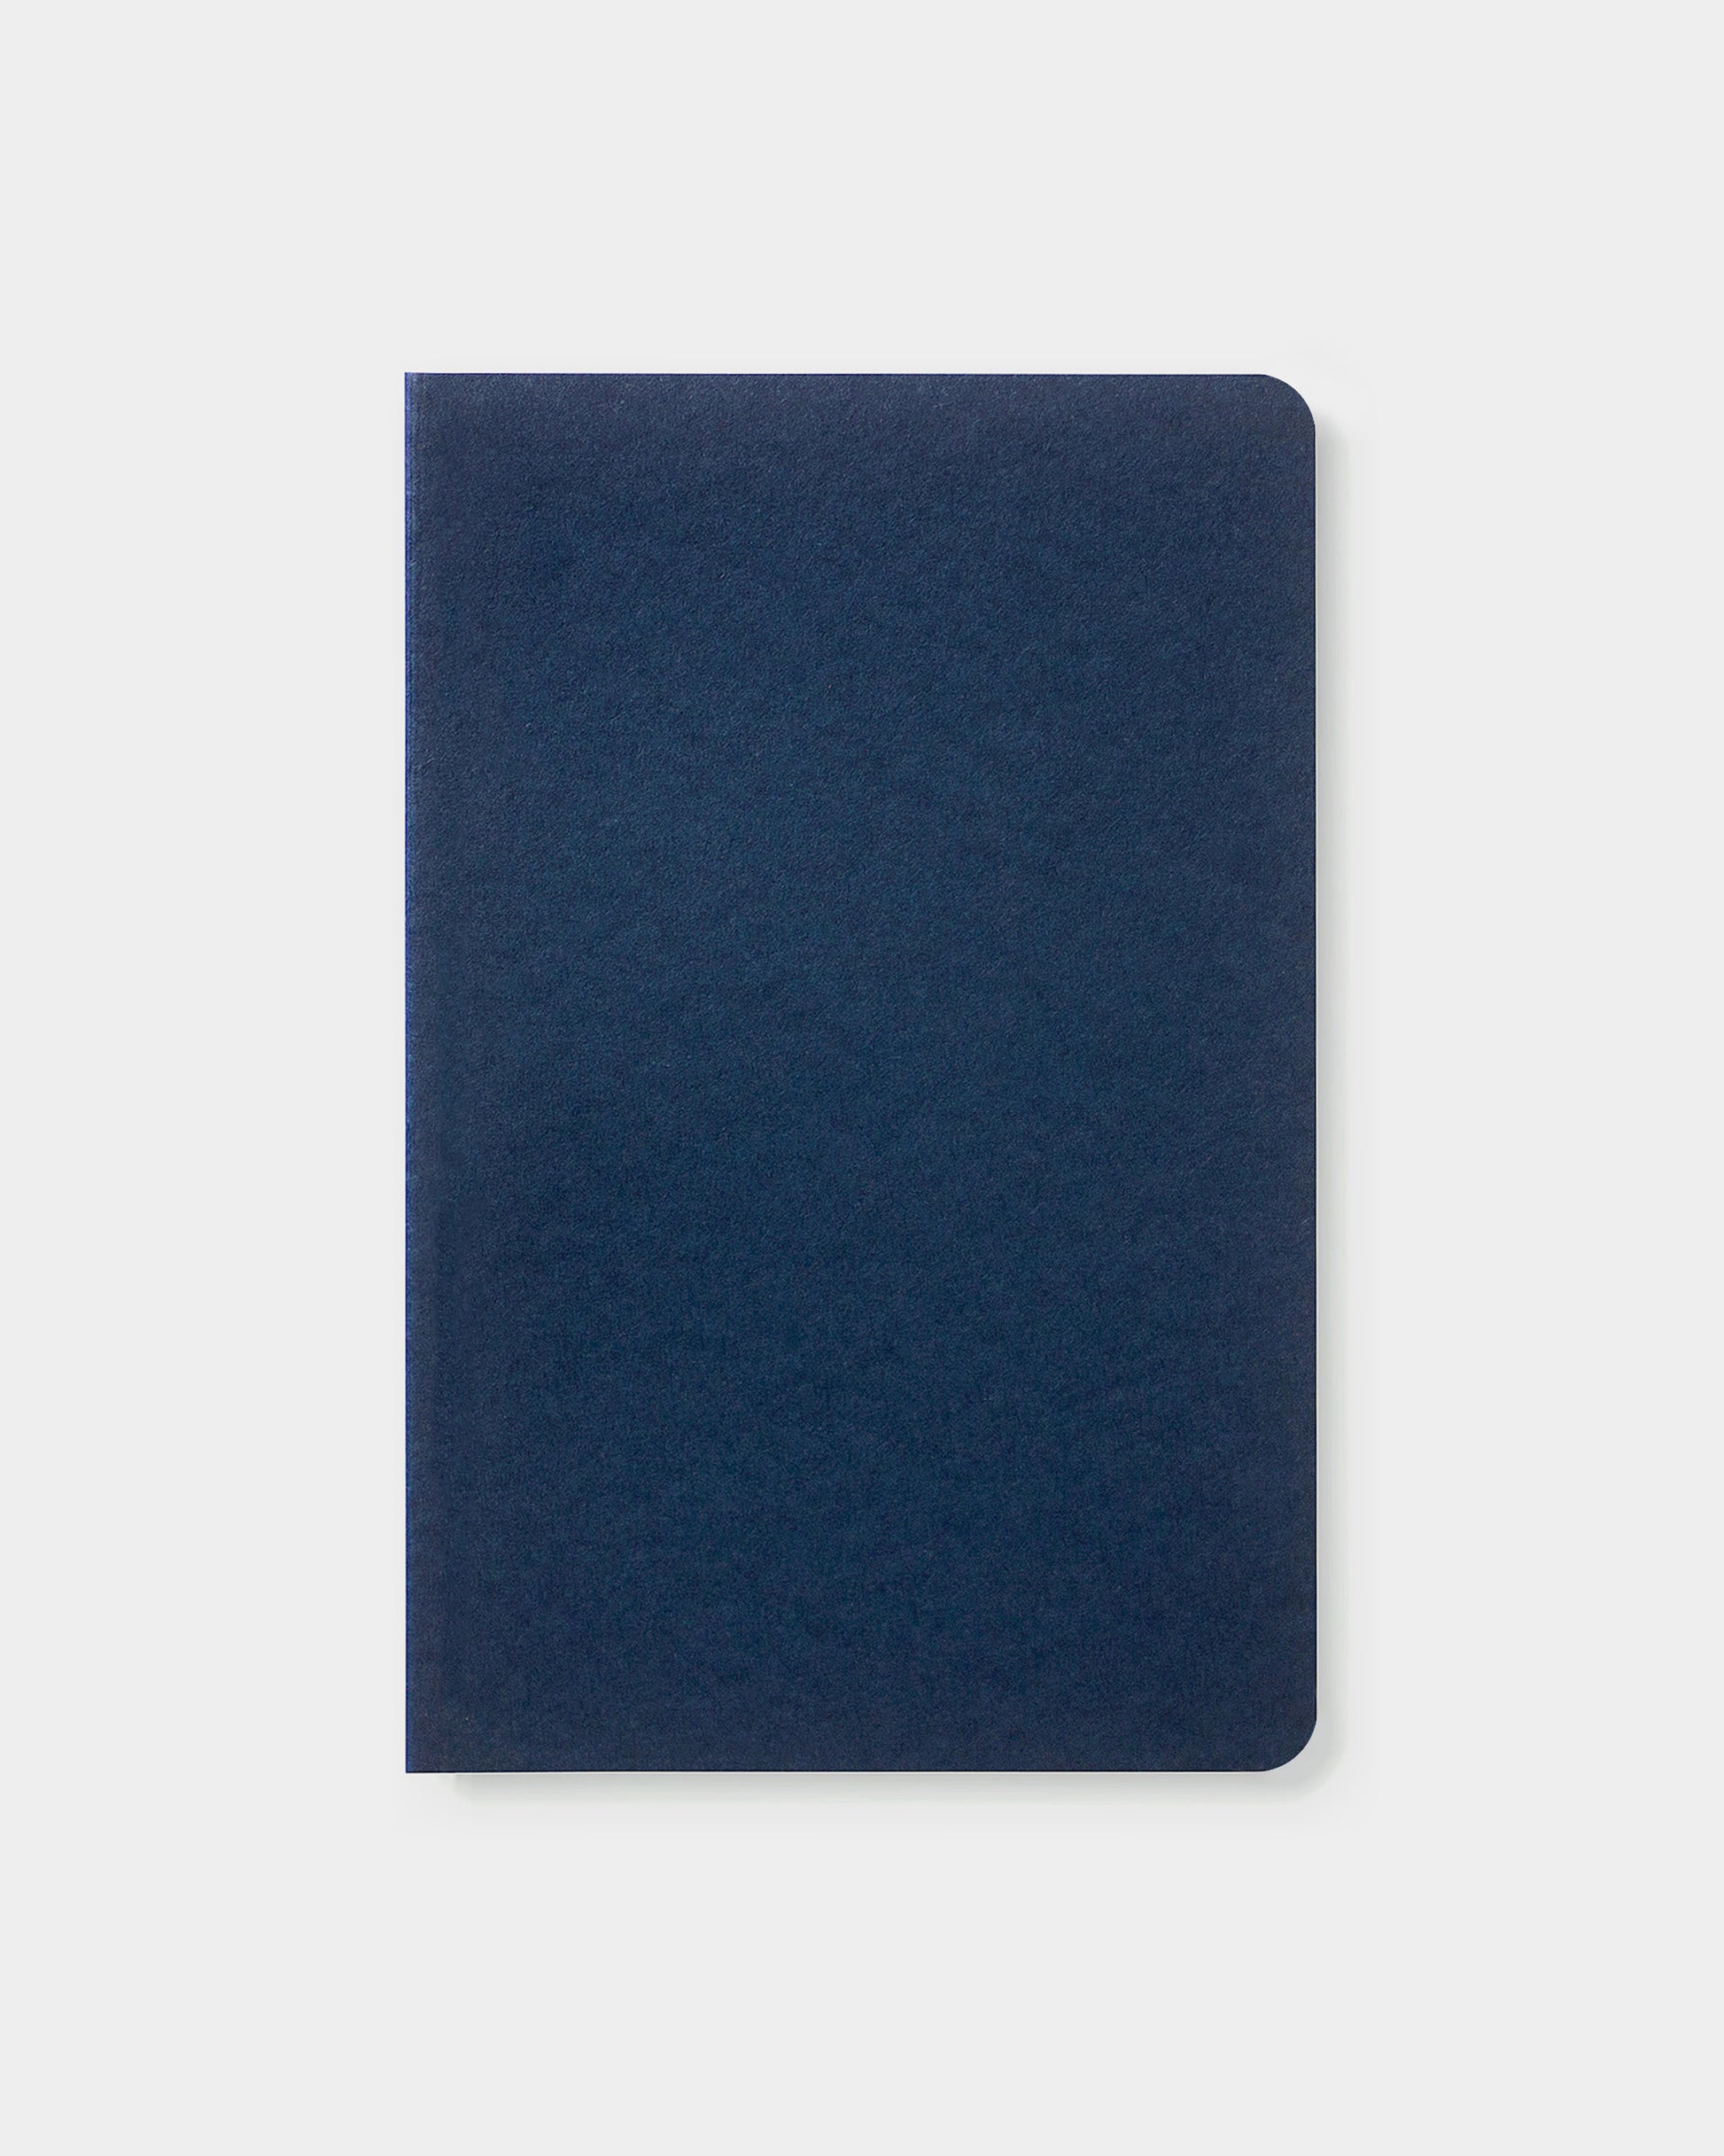 4.25 x 6.5" standard notebook, made with eco-friendly papers. Blank pages, navy color way.